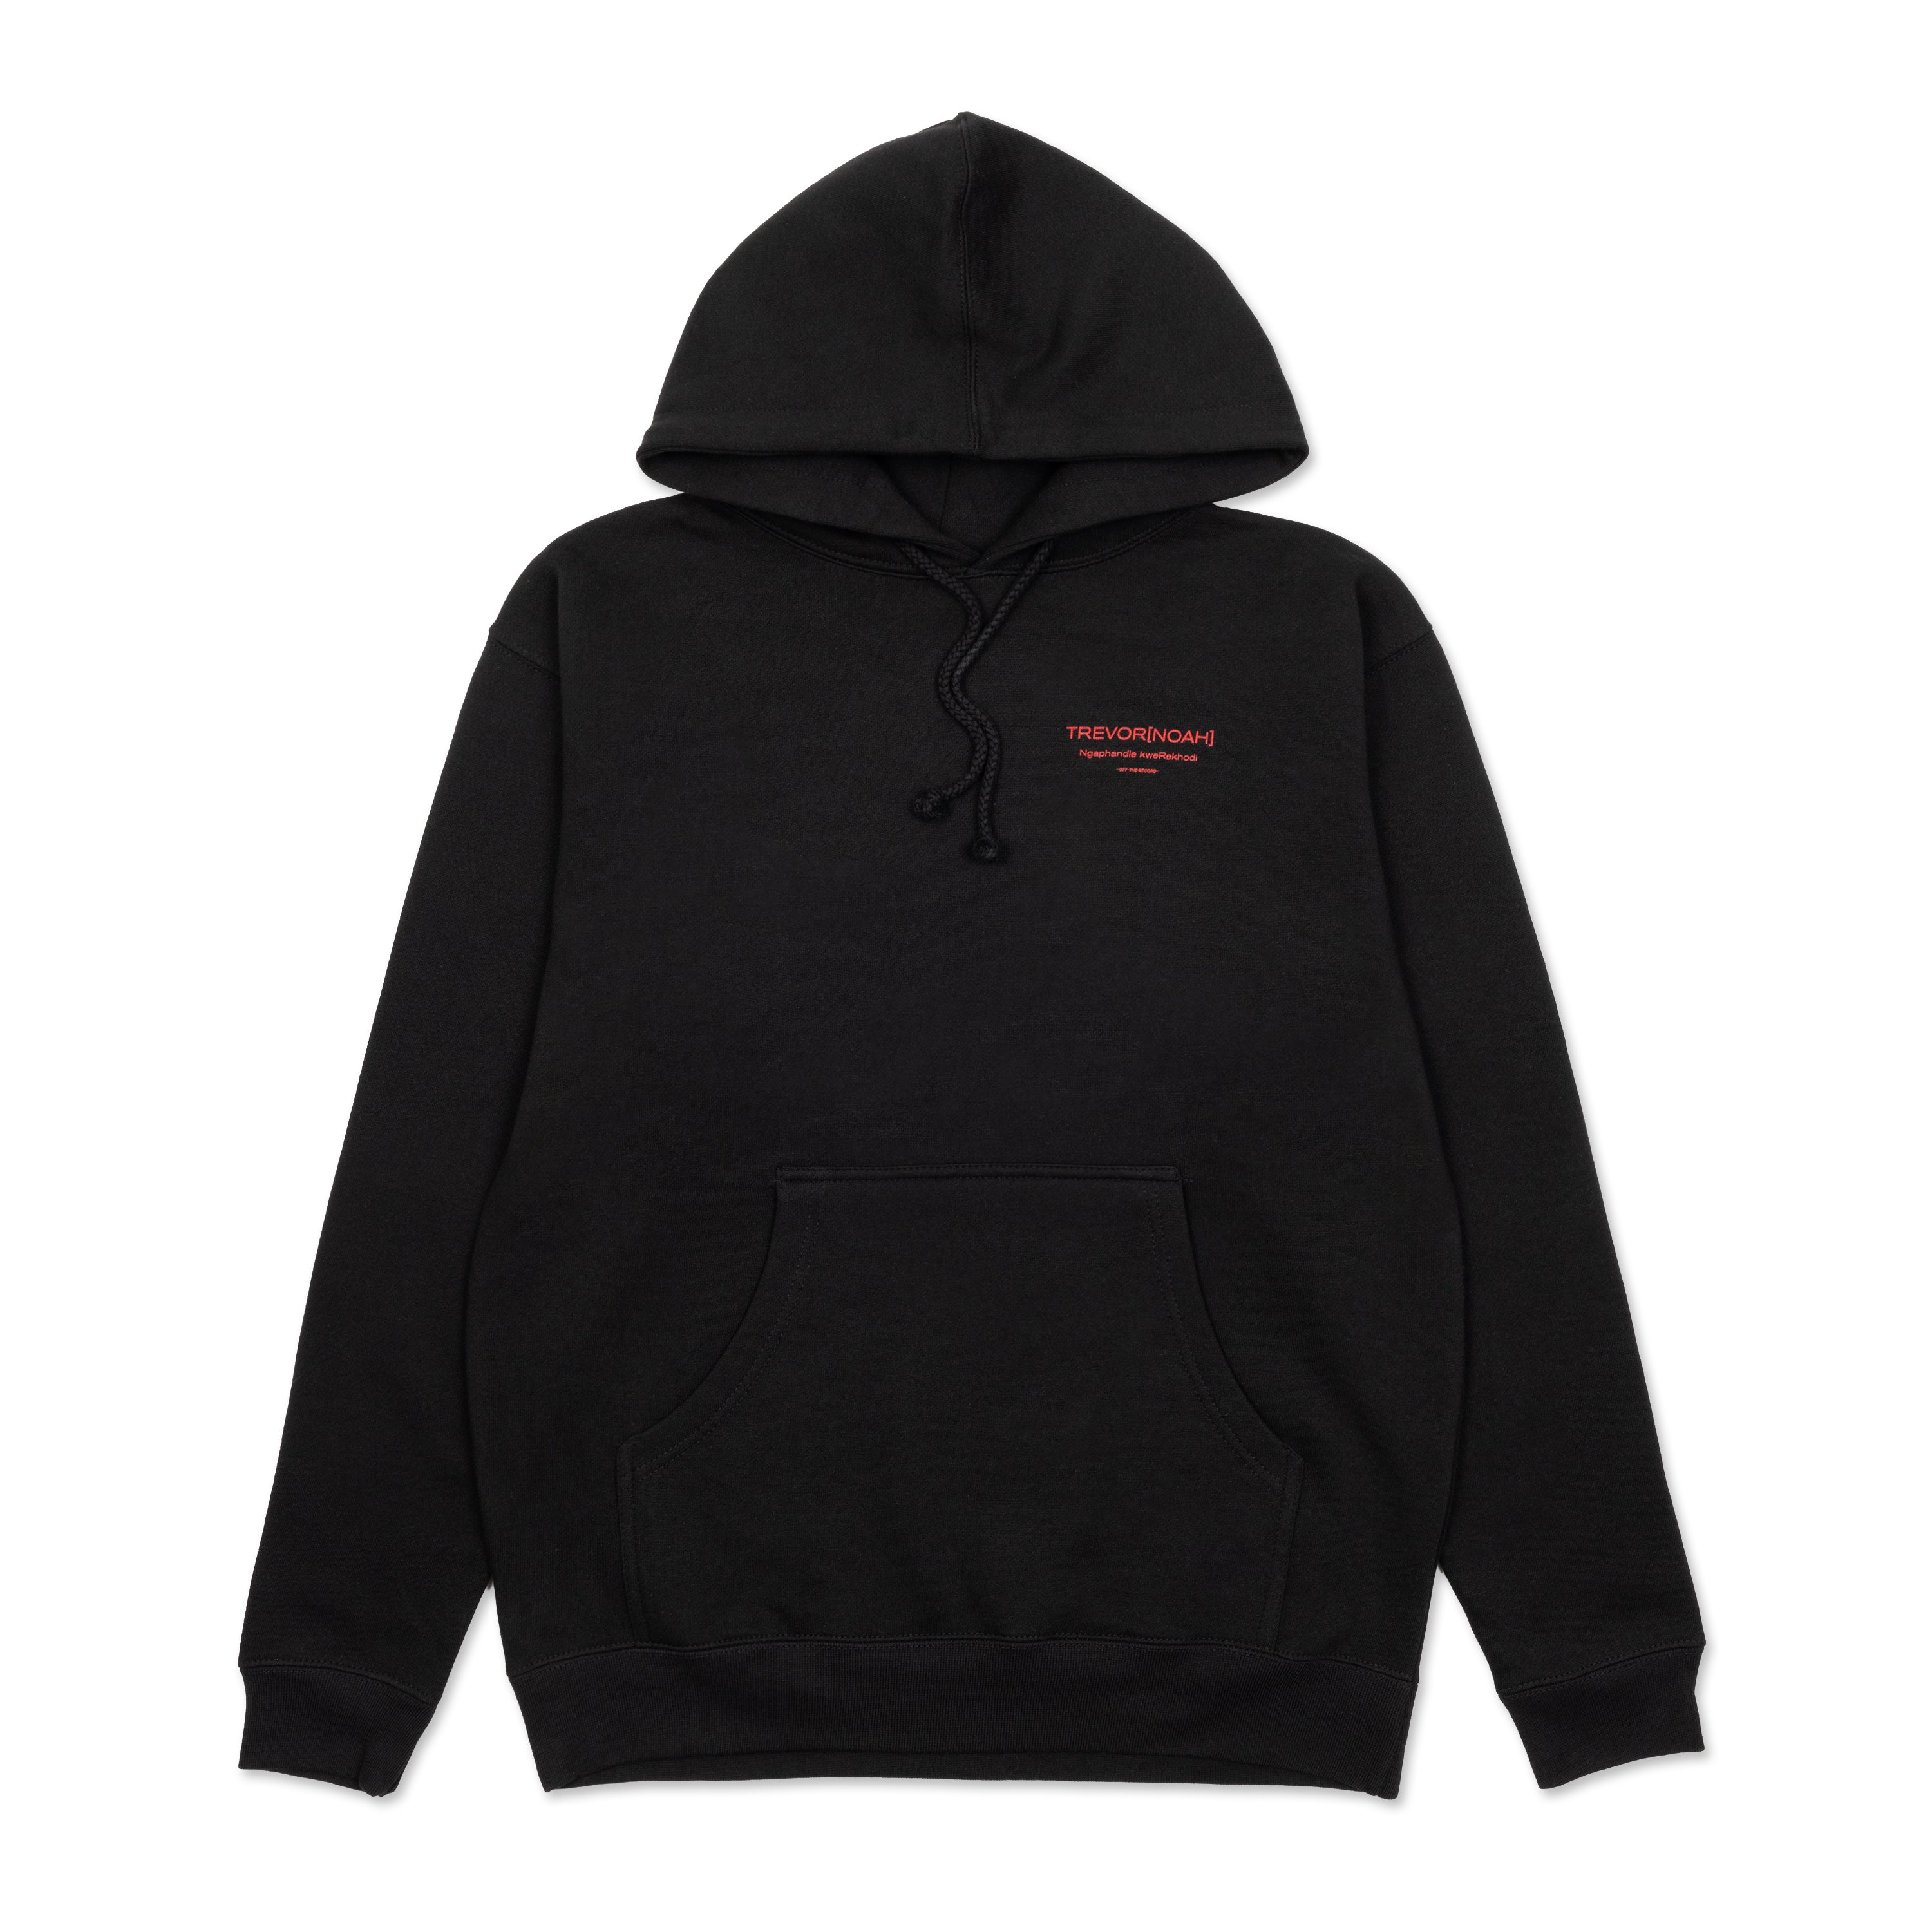 Off The Record Tour Date Hoodie - Black